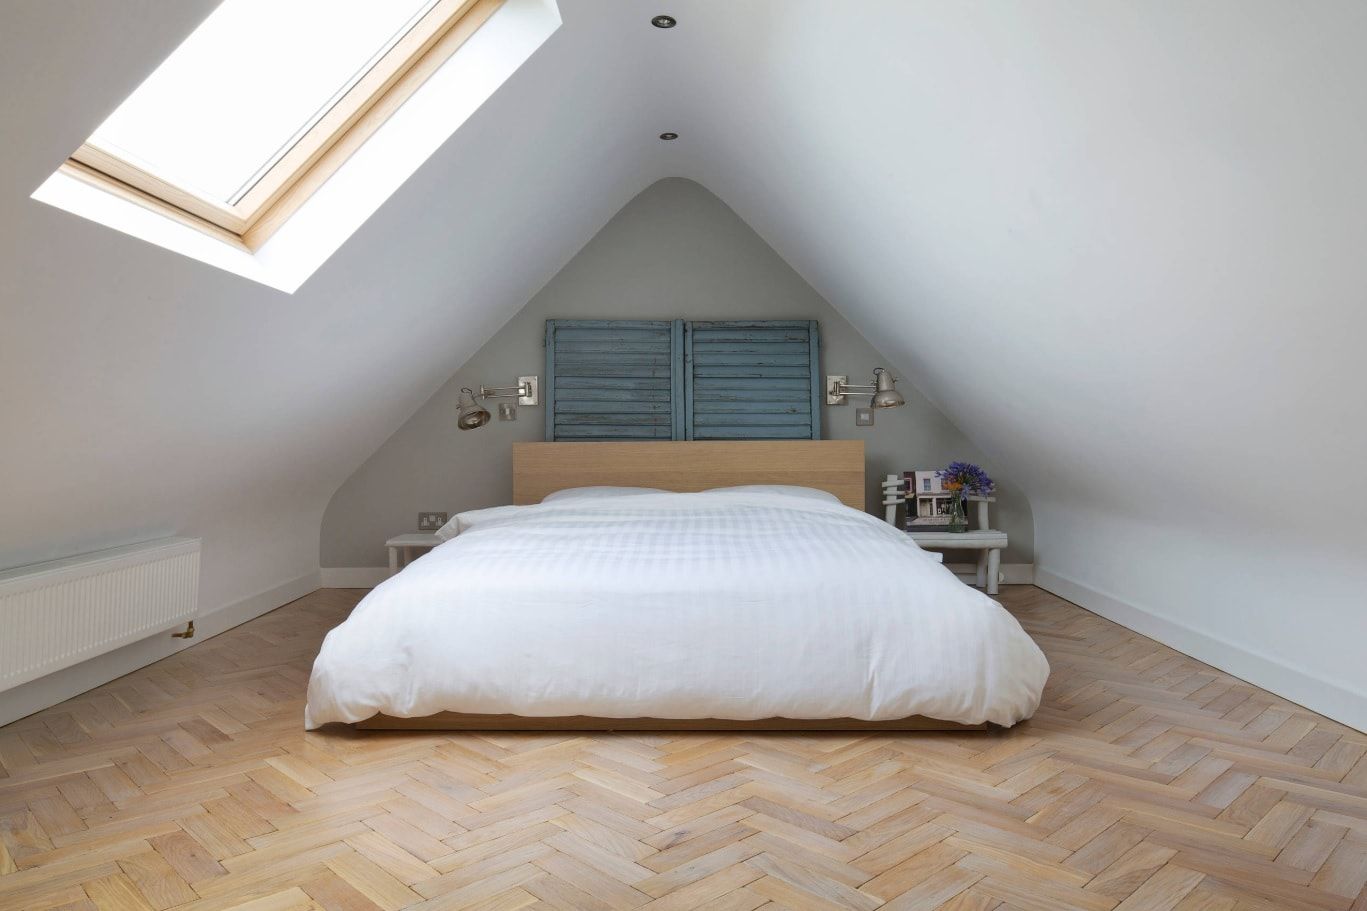 Organizing Comfortable and Functional Attic Room Advice with Photos. Modern Scandinavian style of the bedroom with platform bed